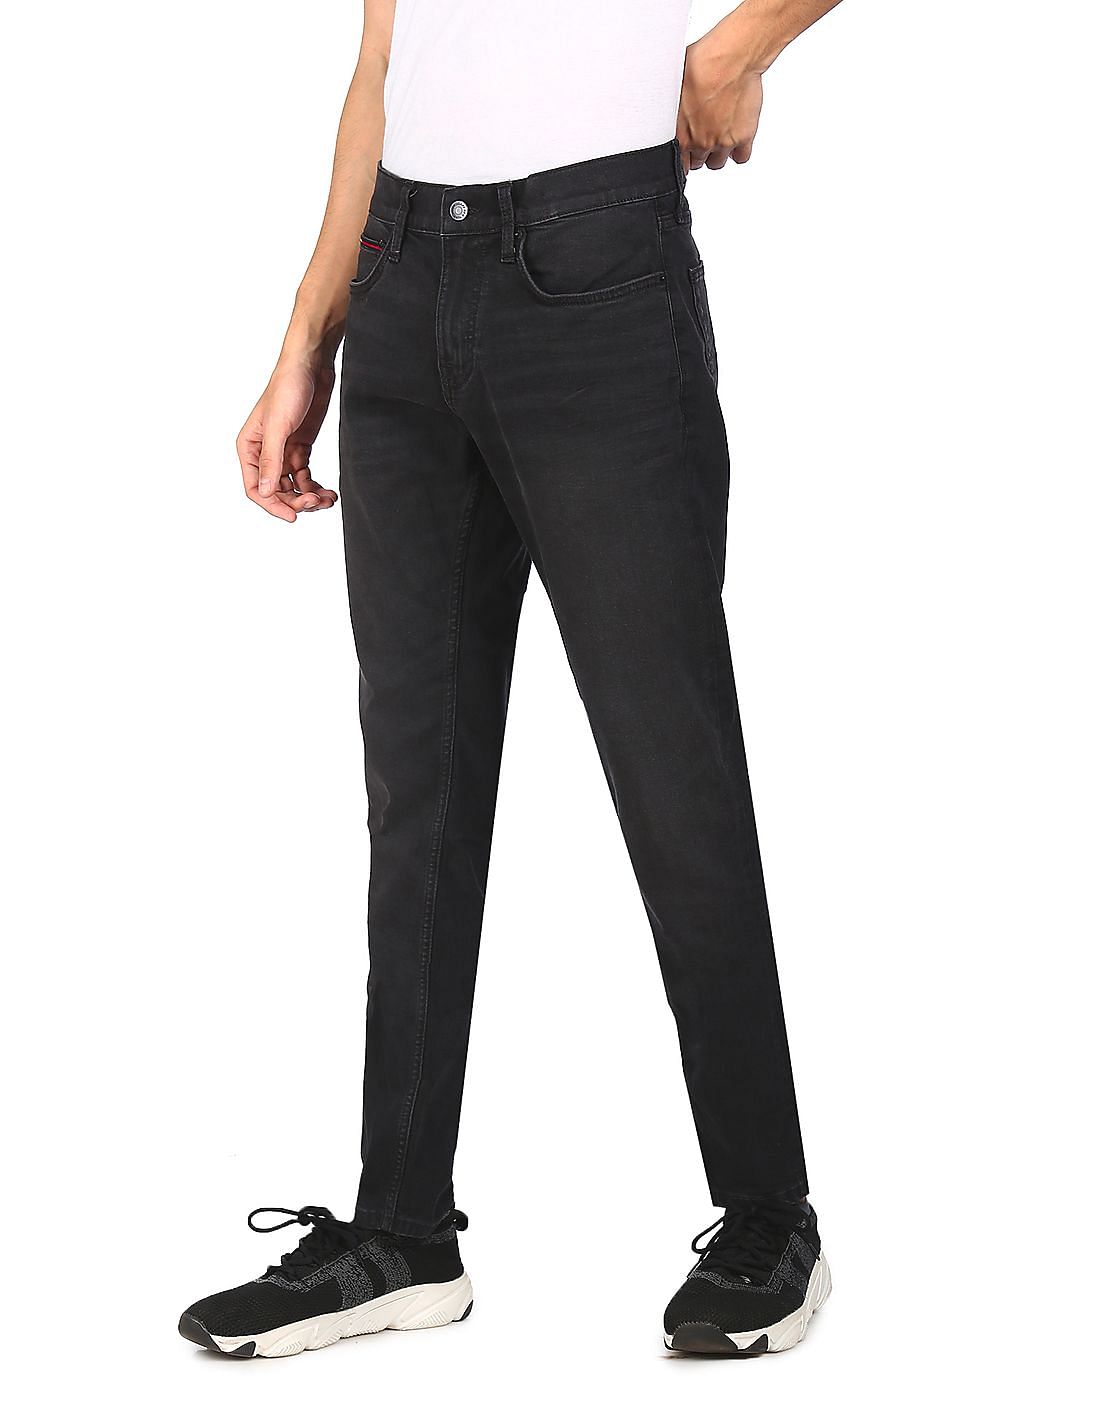 Buy Tommy Hilfiger Men Black Mid Rise Clean Look Jeans - NNNOW.com